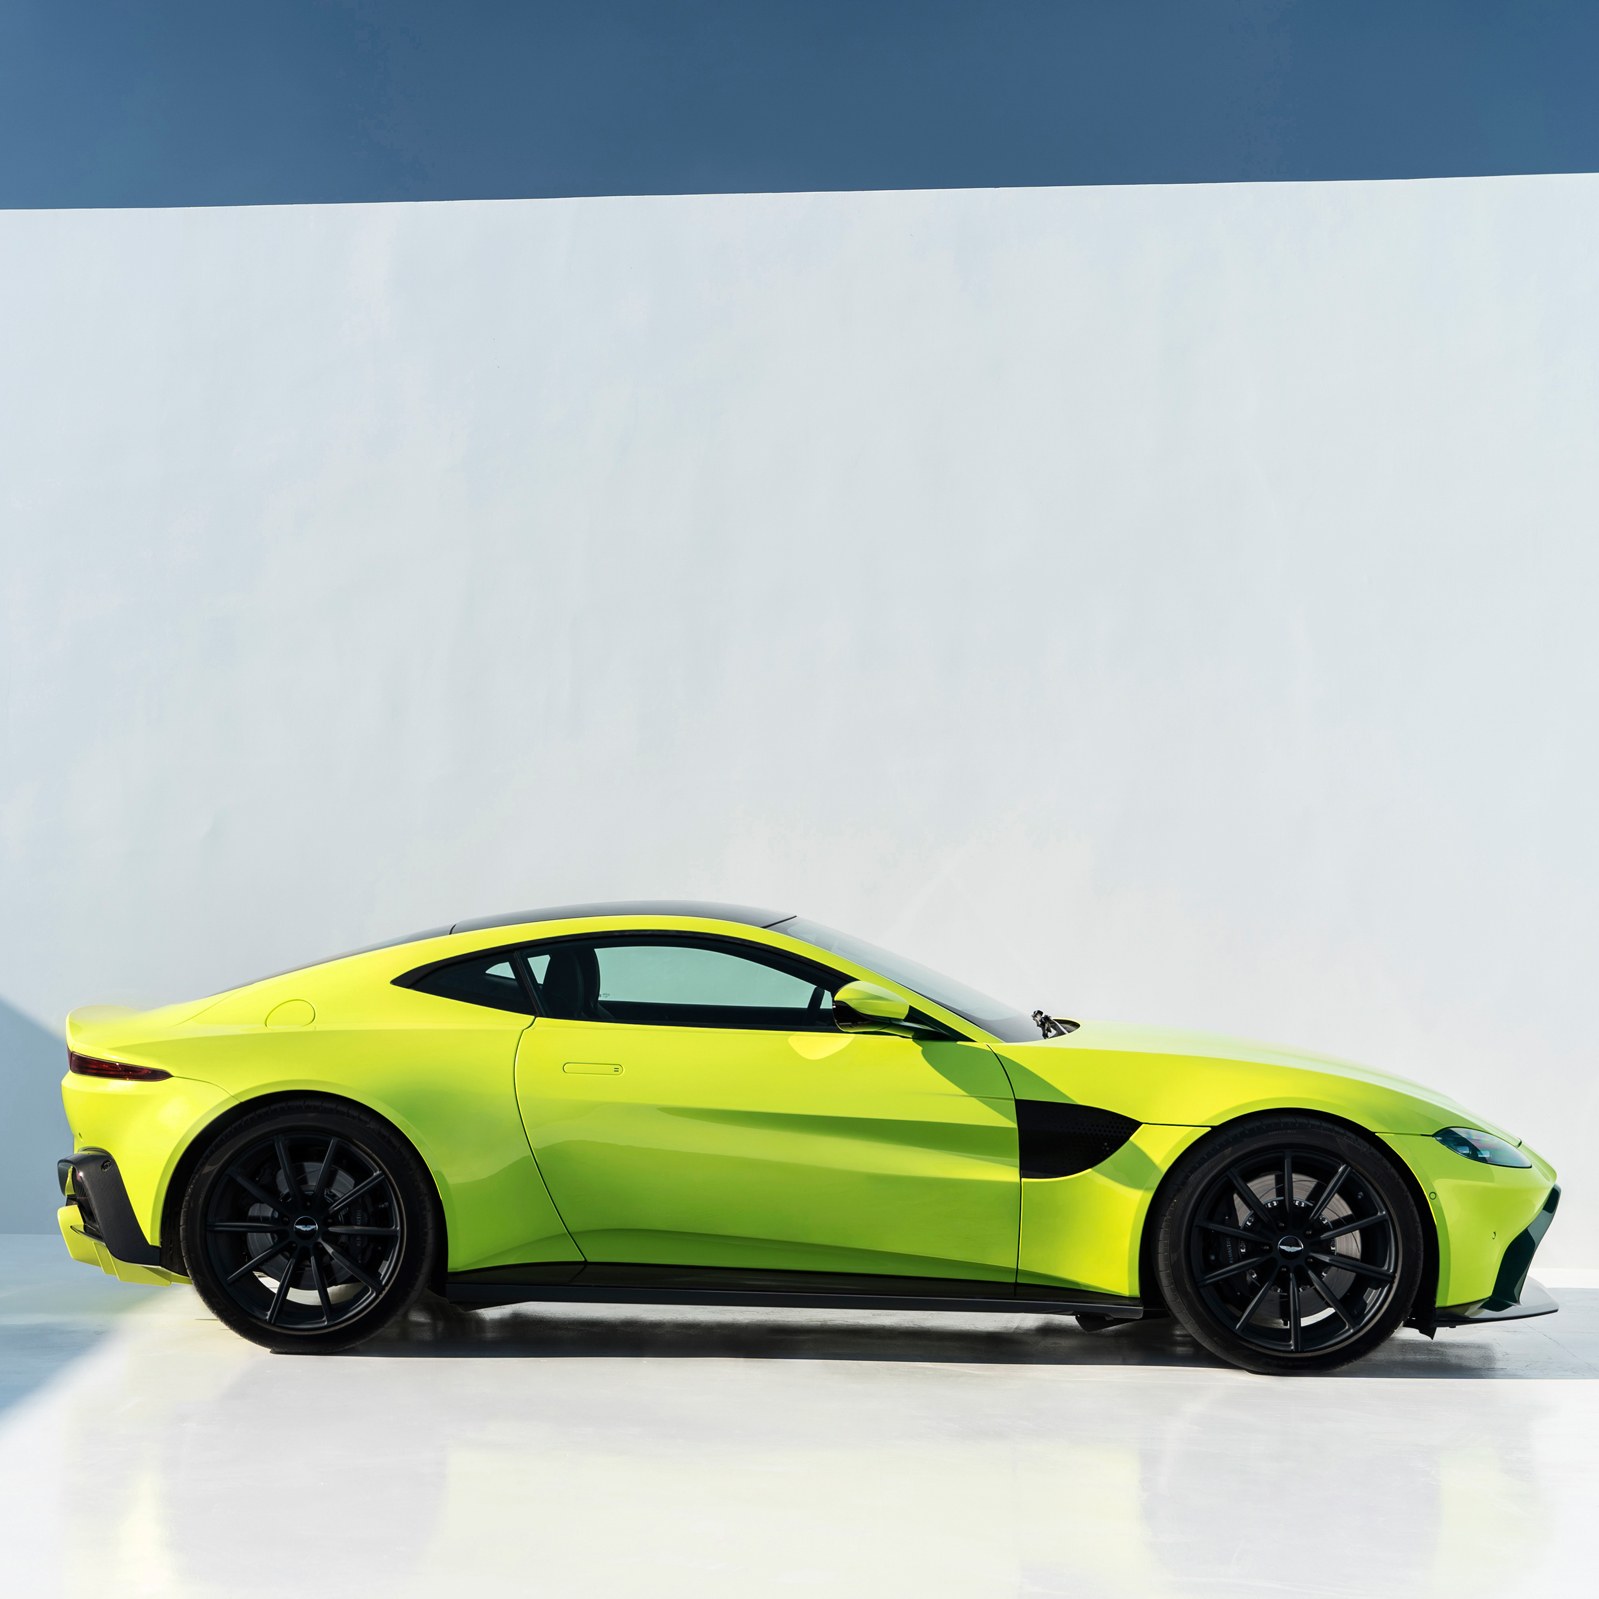 Sports Cars | Latest News, Photos & Videos | WIRED